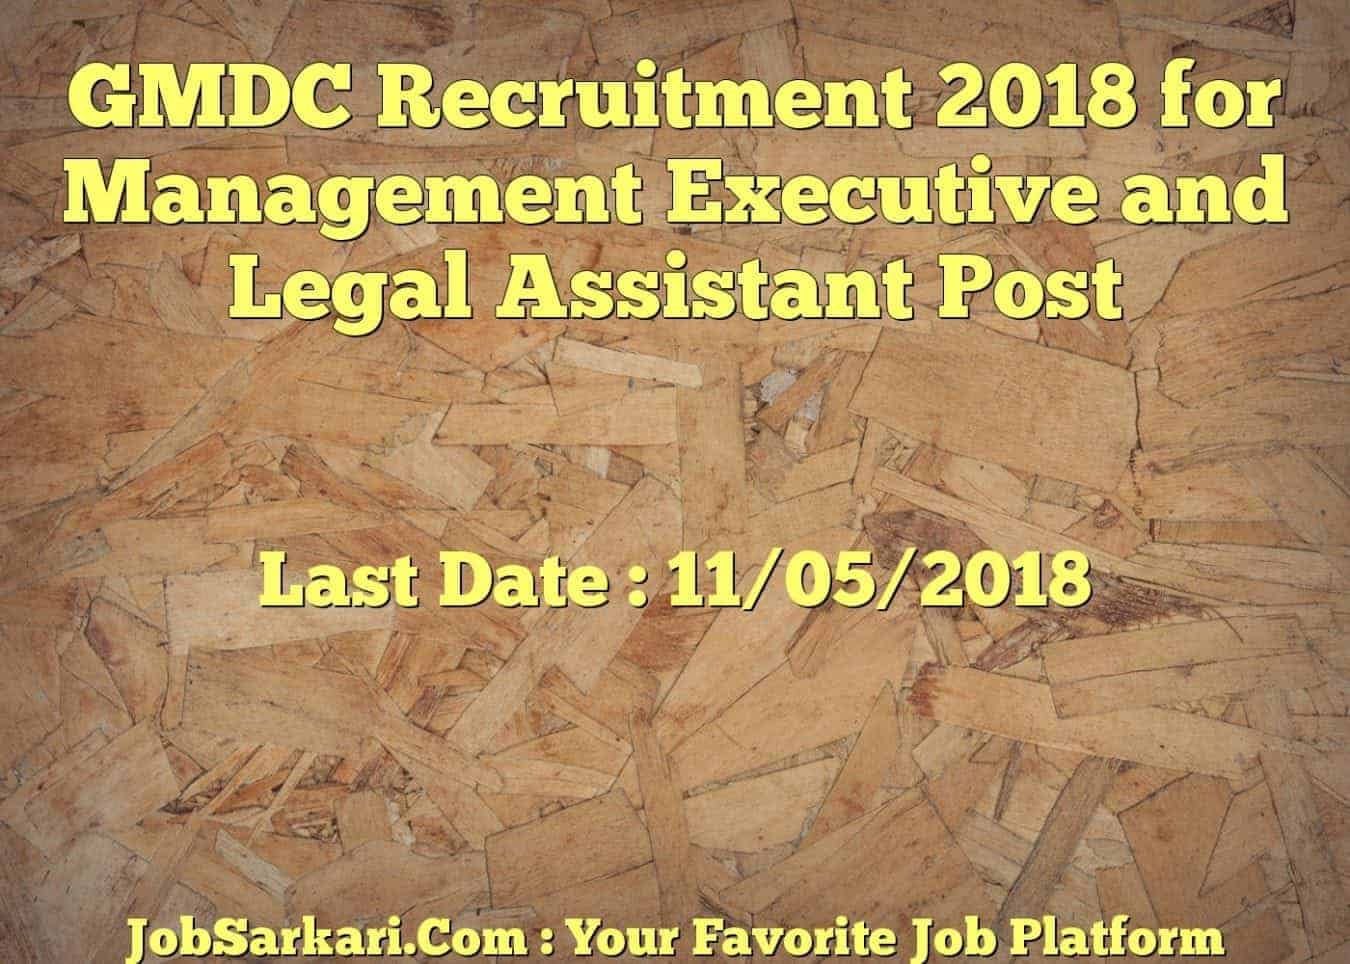 GMDC Recruitment 2018 for Management Executive and Legal Assistant Post